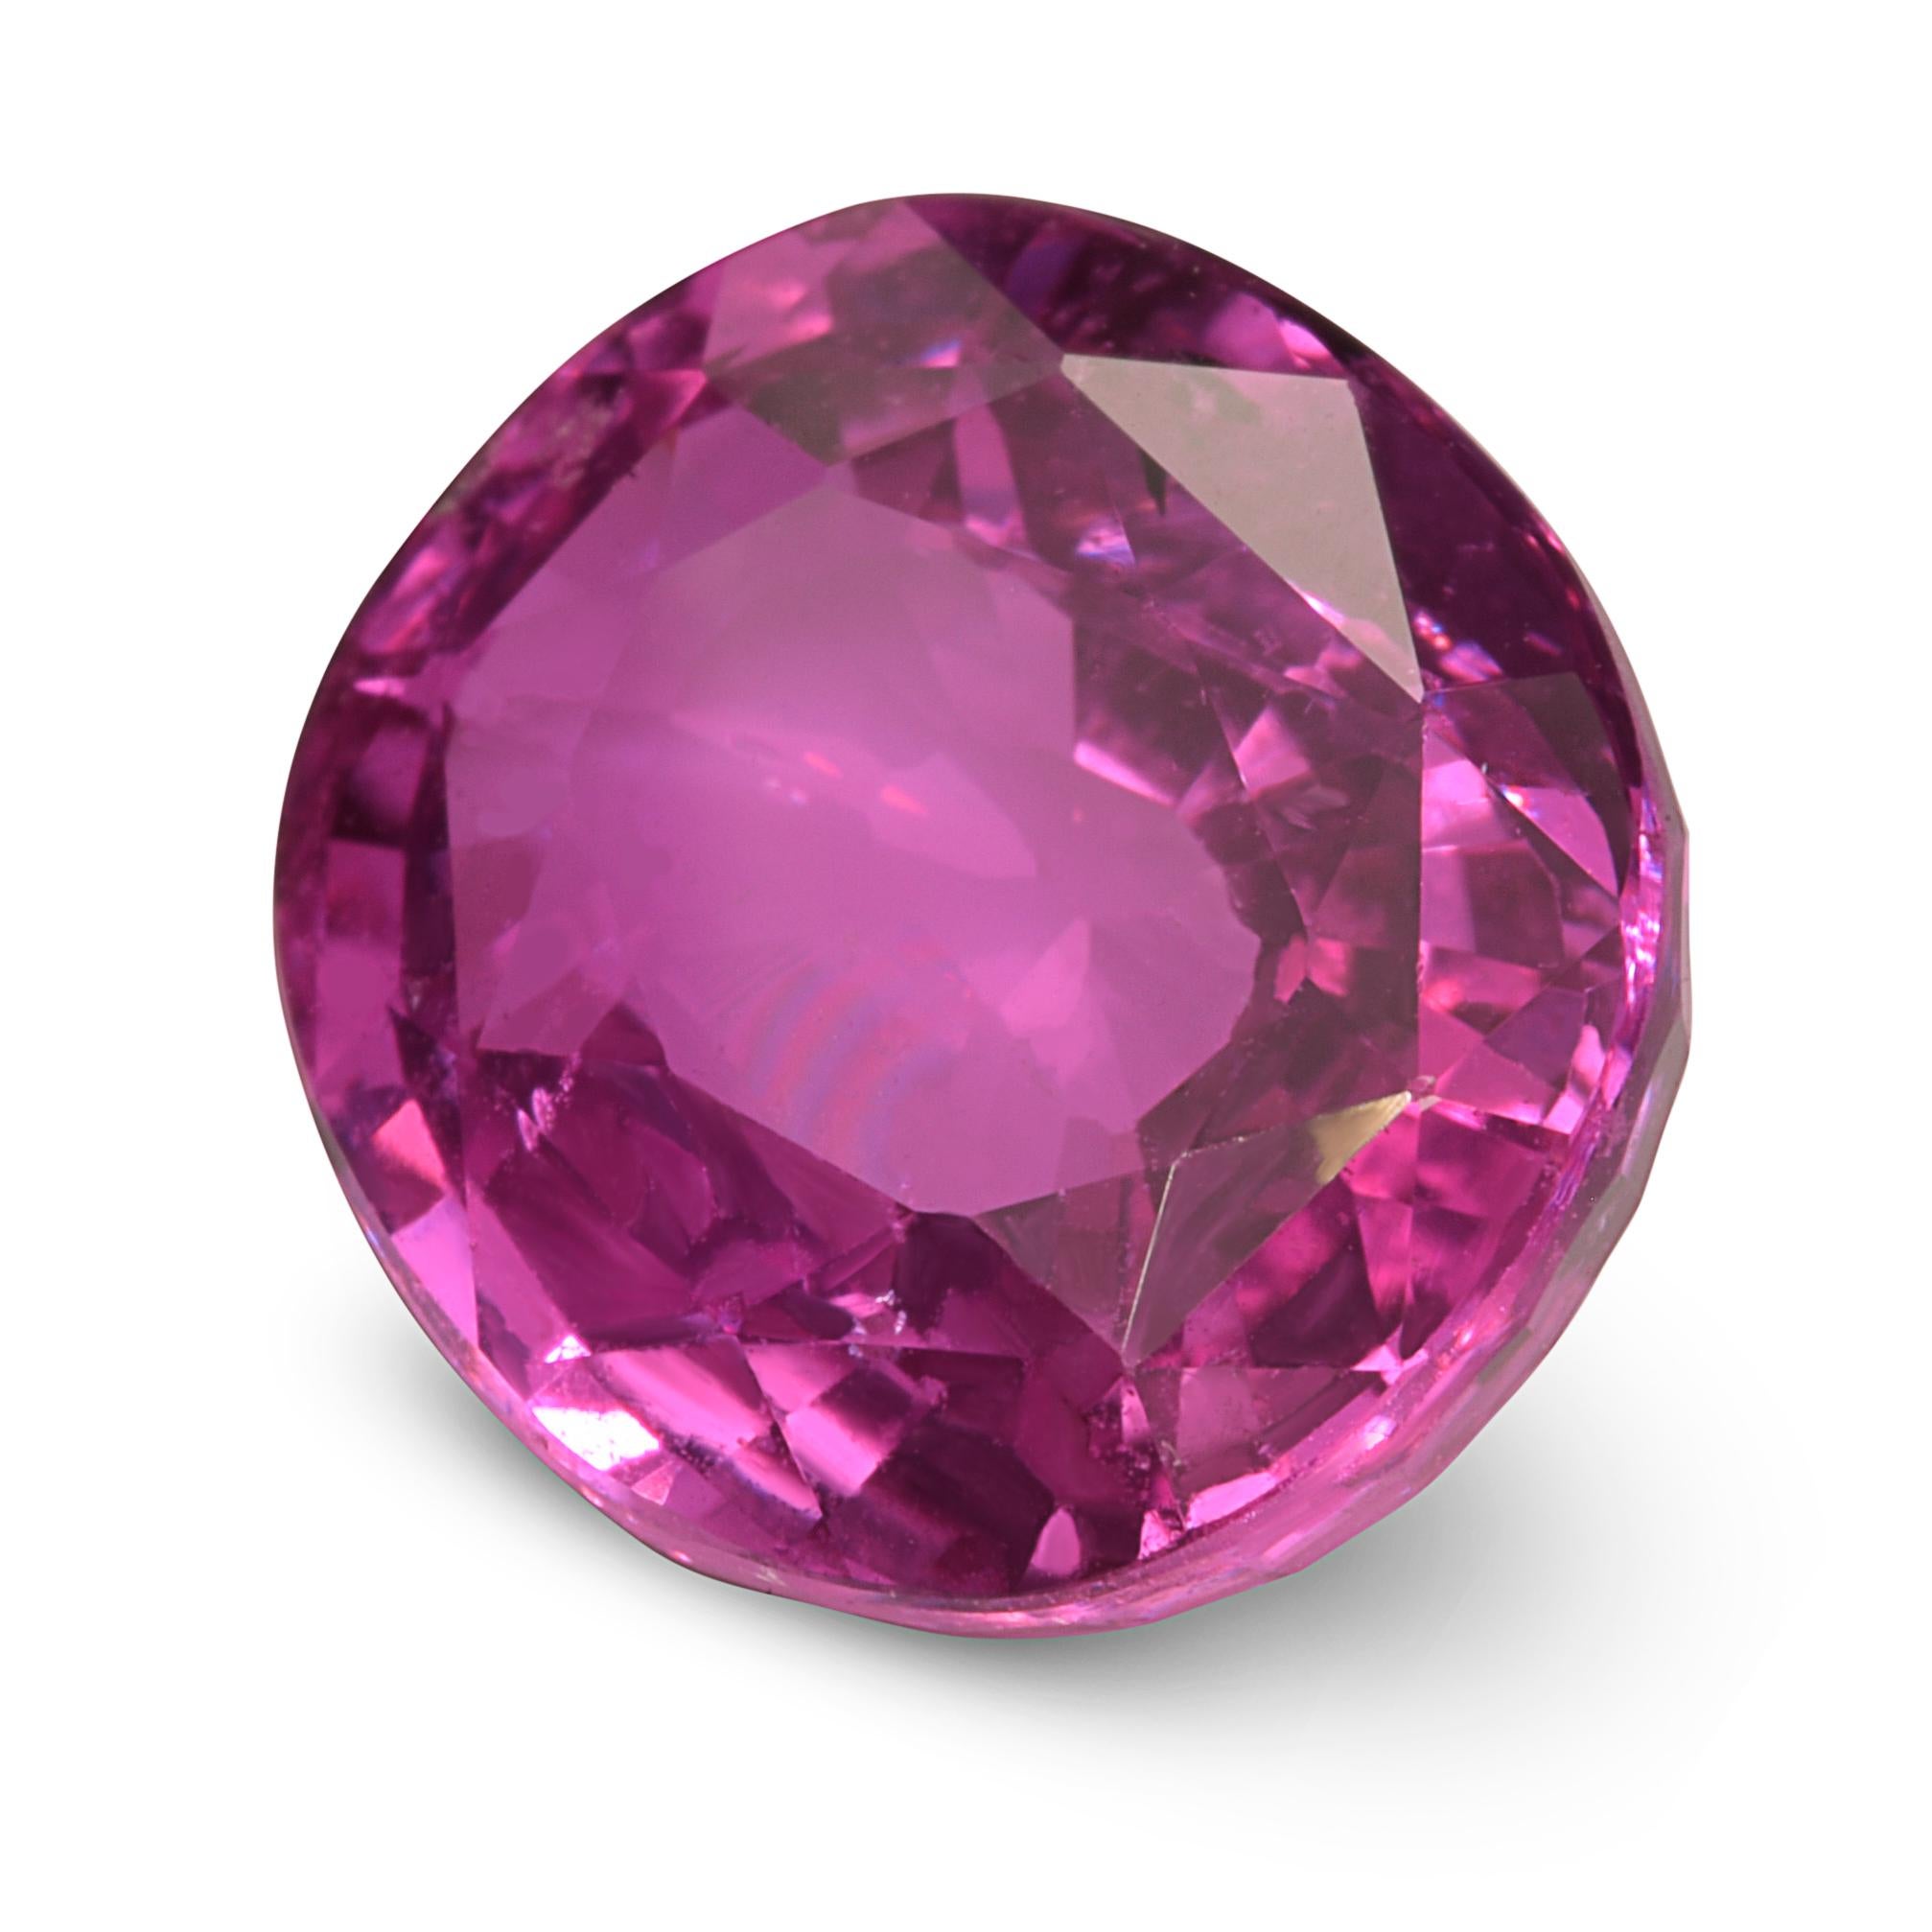 Mixed Cut GIA Certified 3.78 Carats Heated Pink Sapphire  For Sale